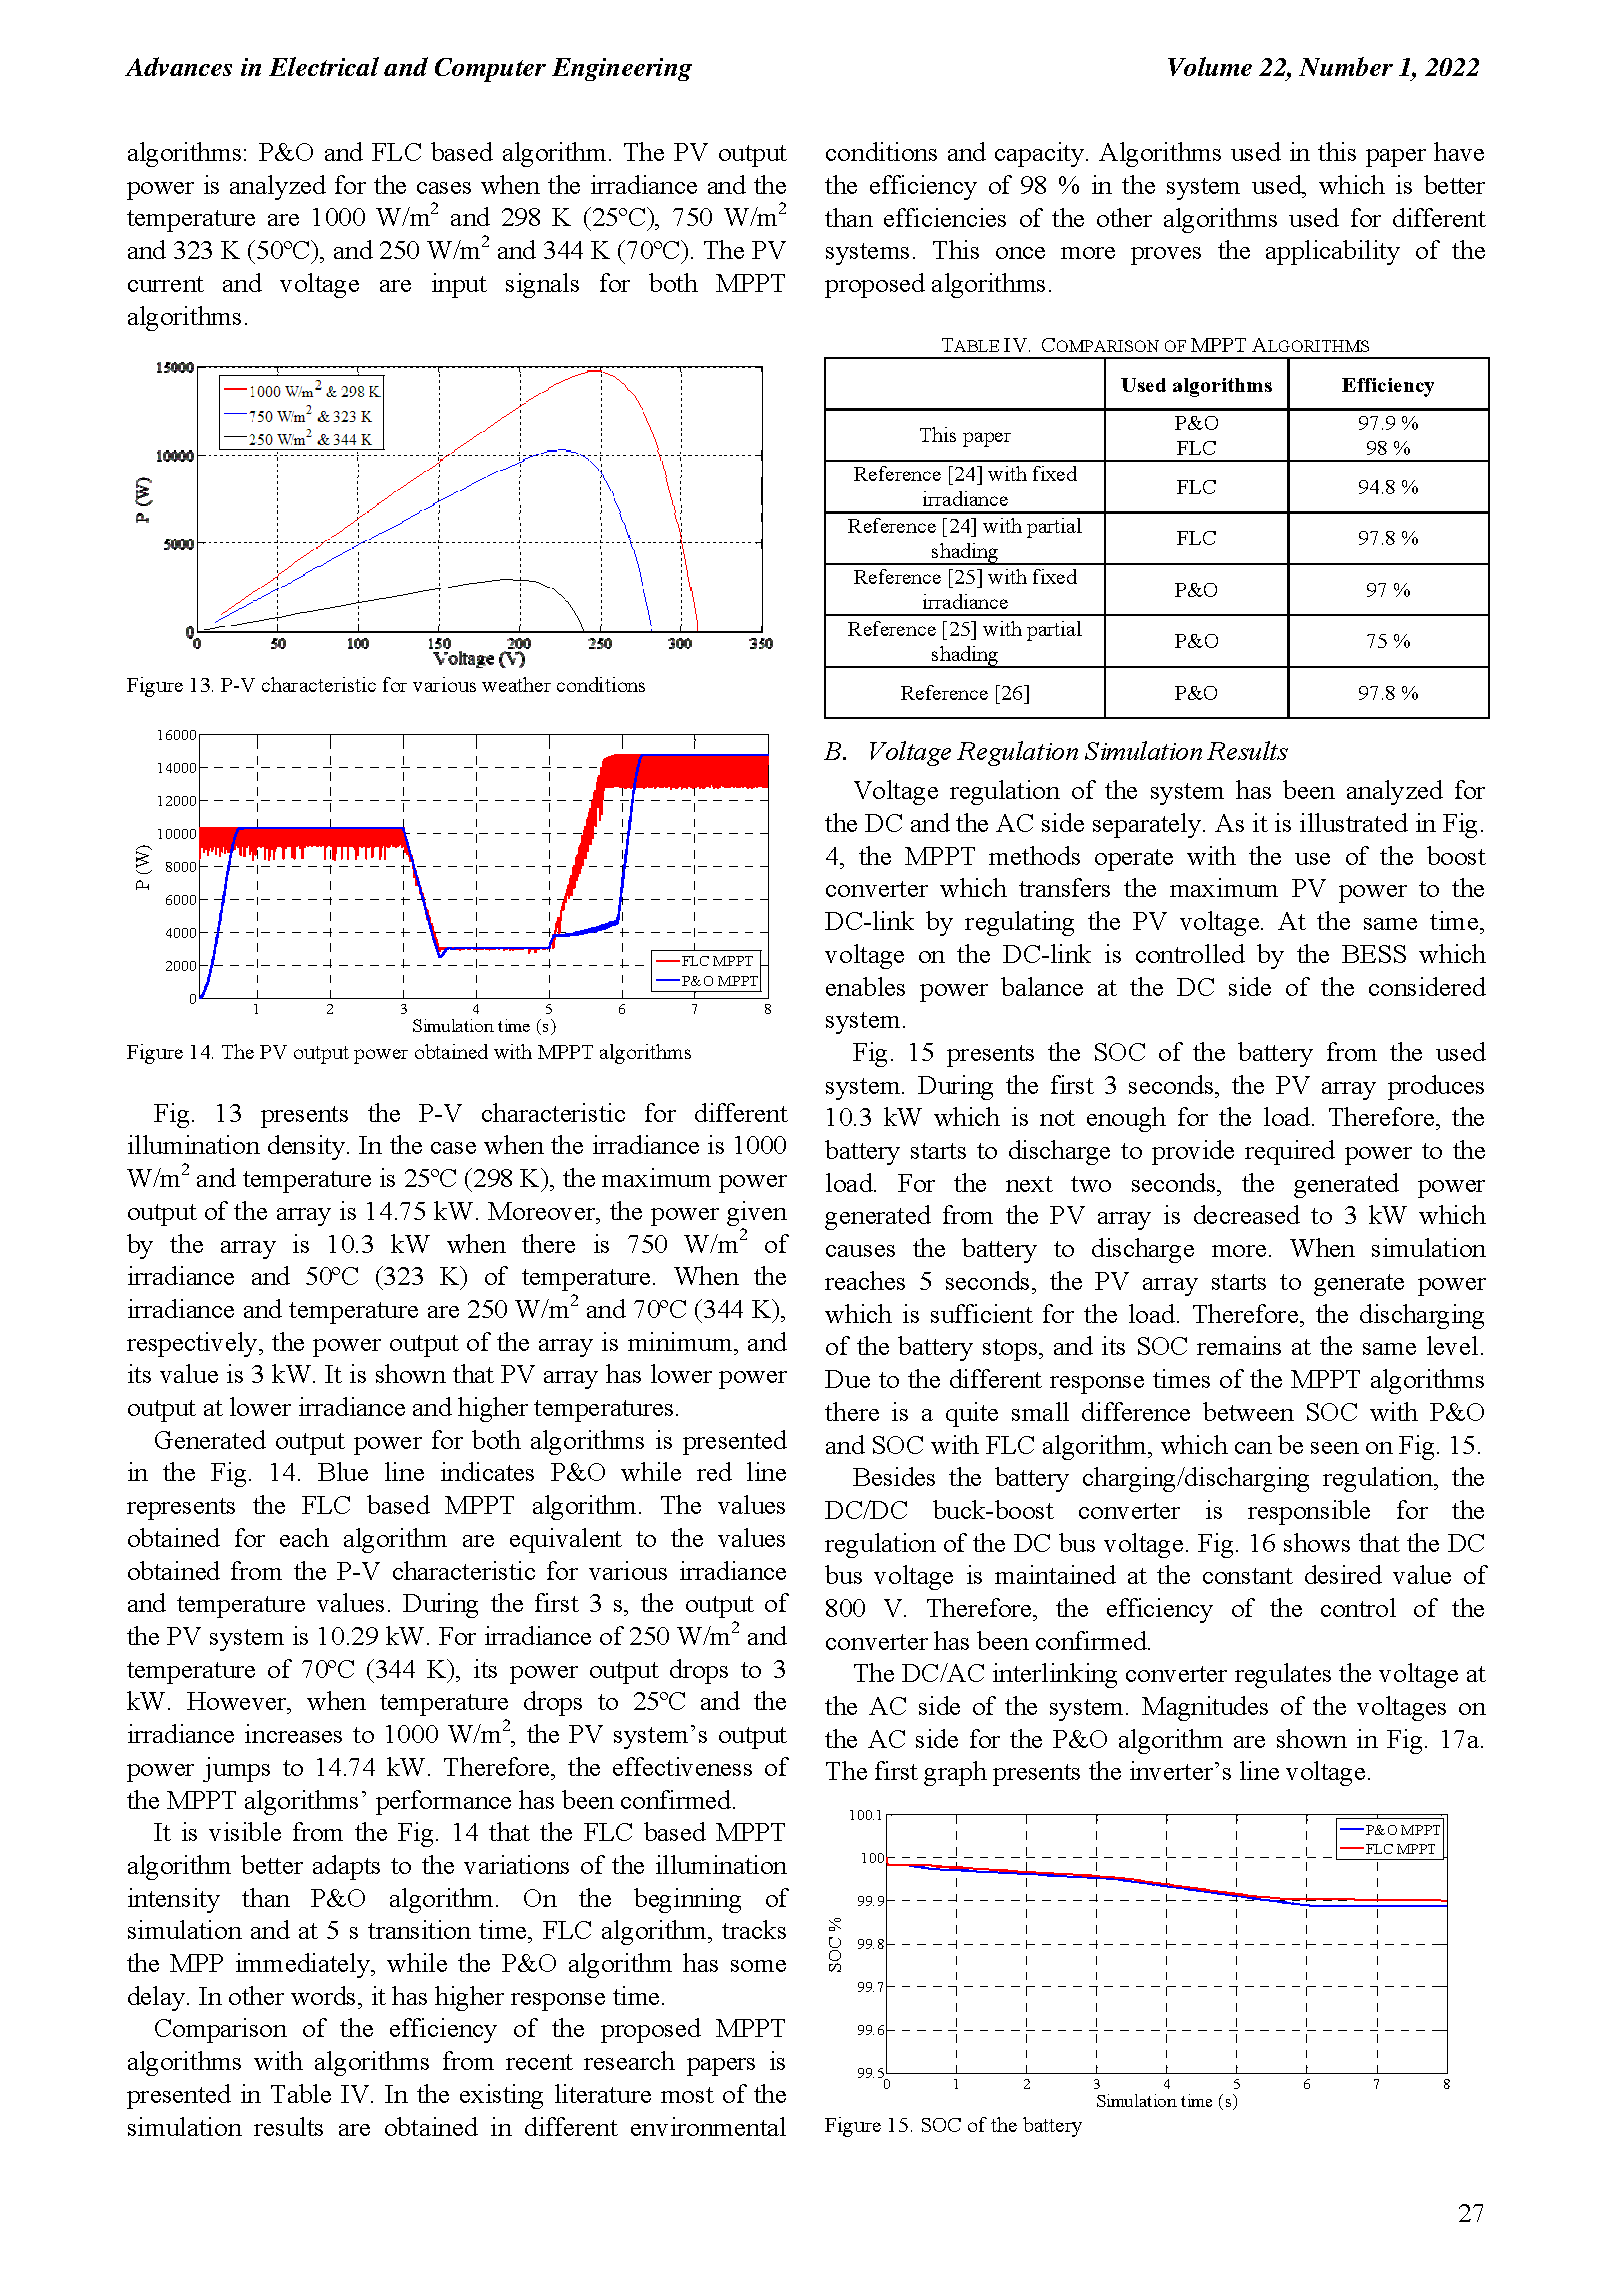 PDF Quickview for paper with DOI:10.4316/AECE.2022.01003